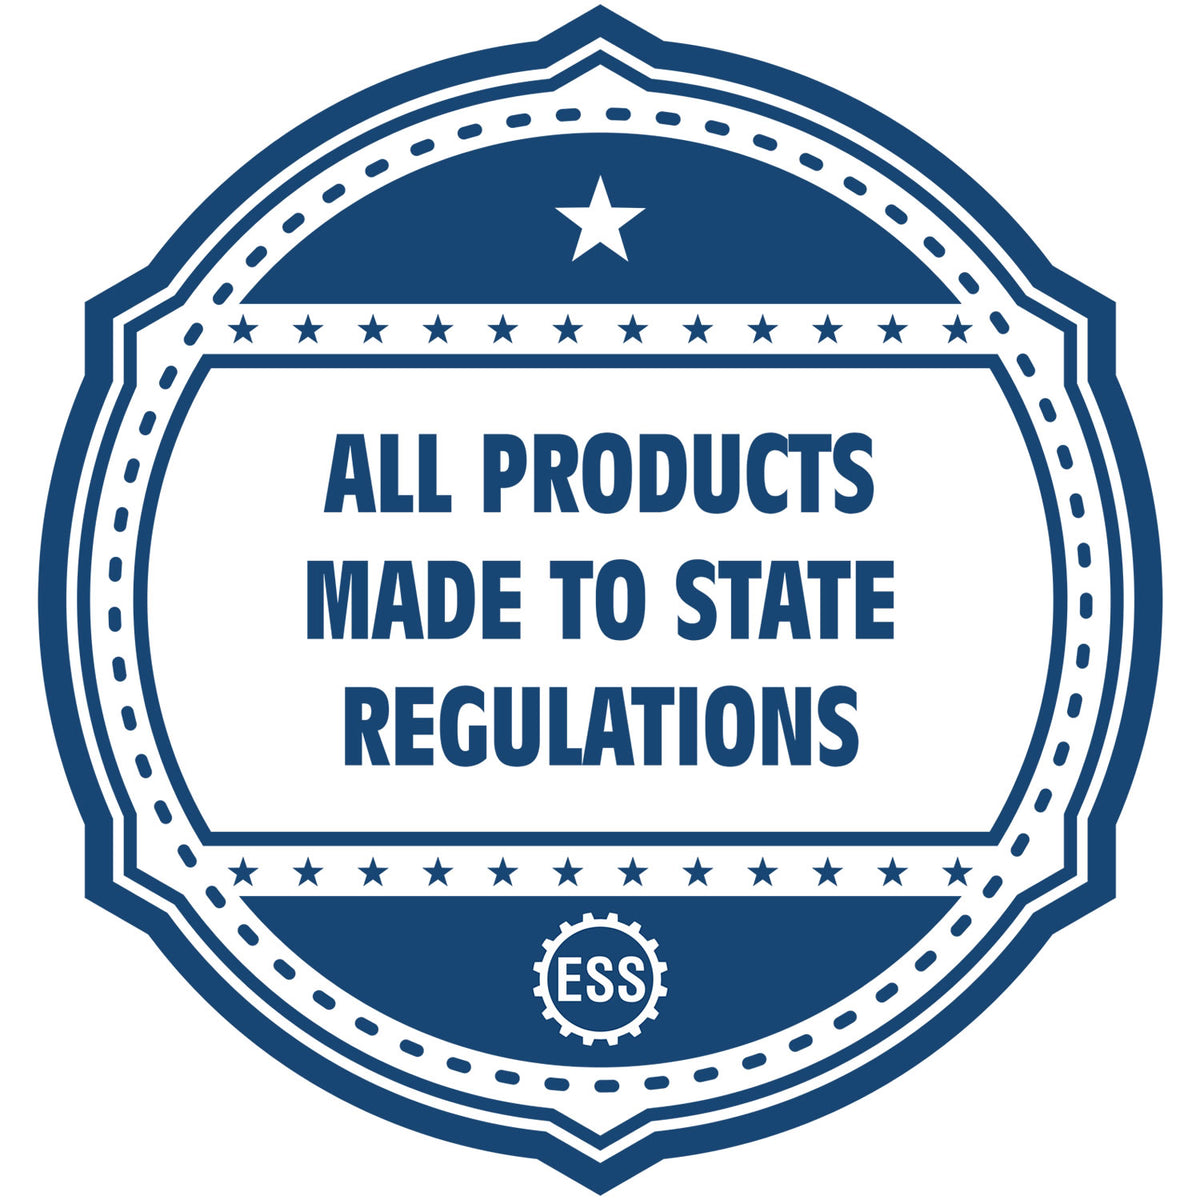 An icon or badge element for the State of Vermont Long Reach Architectural Embossing Seal showing that this product is made in compliance with state regulations.